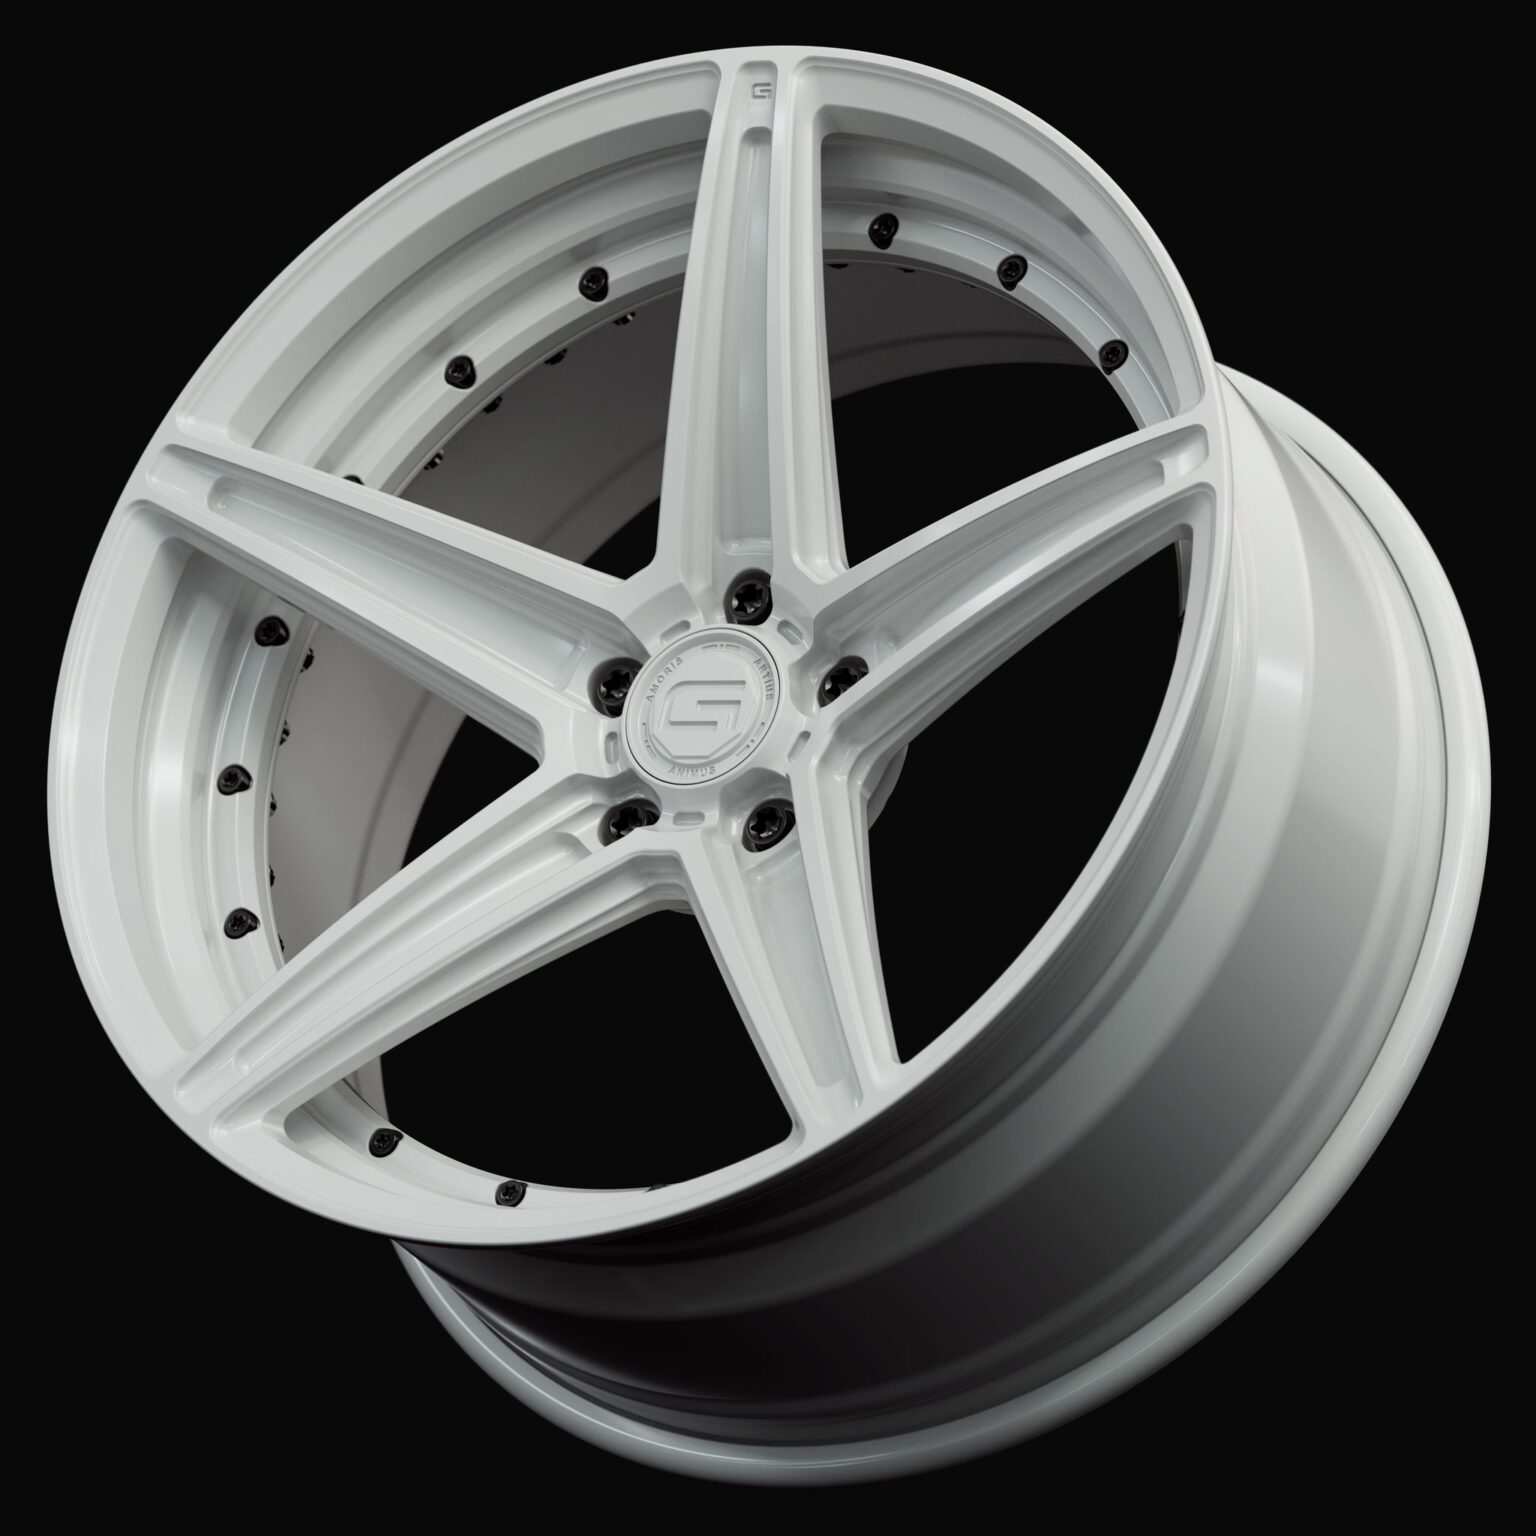 Three-quarter view of a white G52 duoblock wheel from Govad Forged Track series